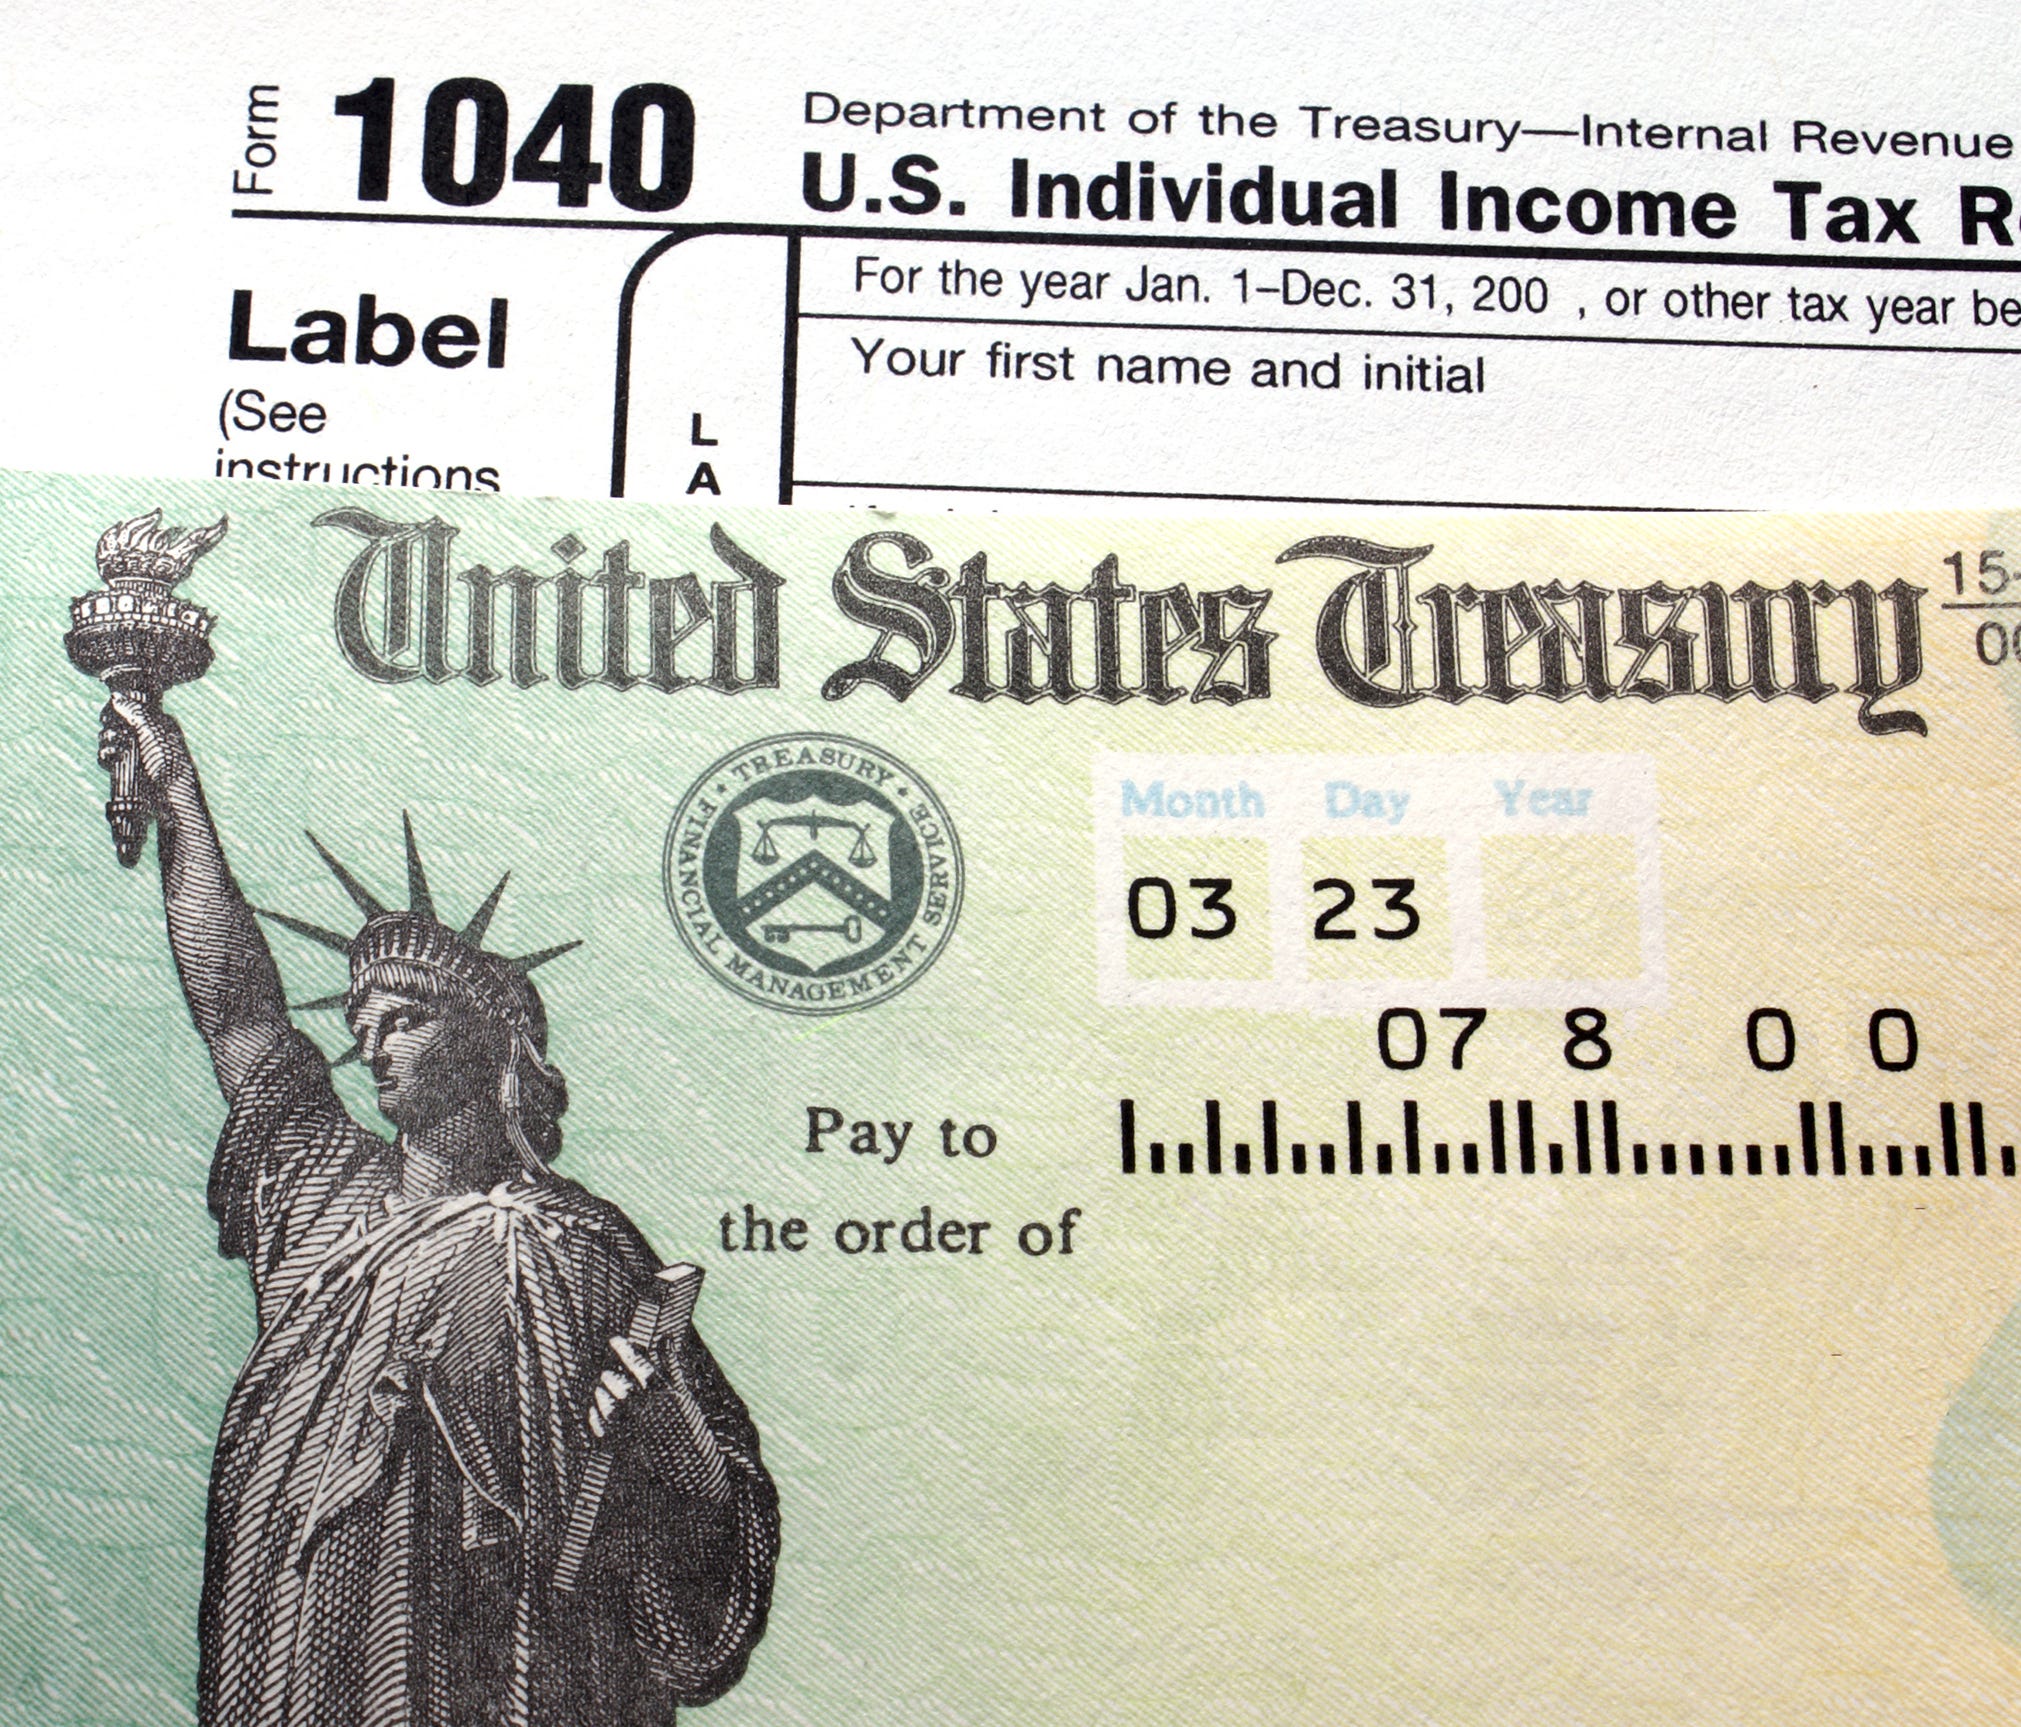 The IRS says many tax refunds remain unclaimed.